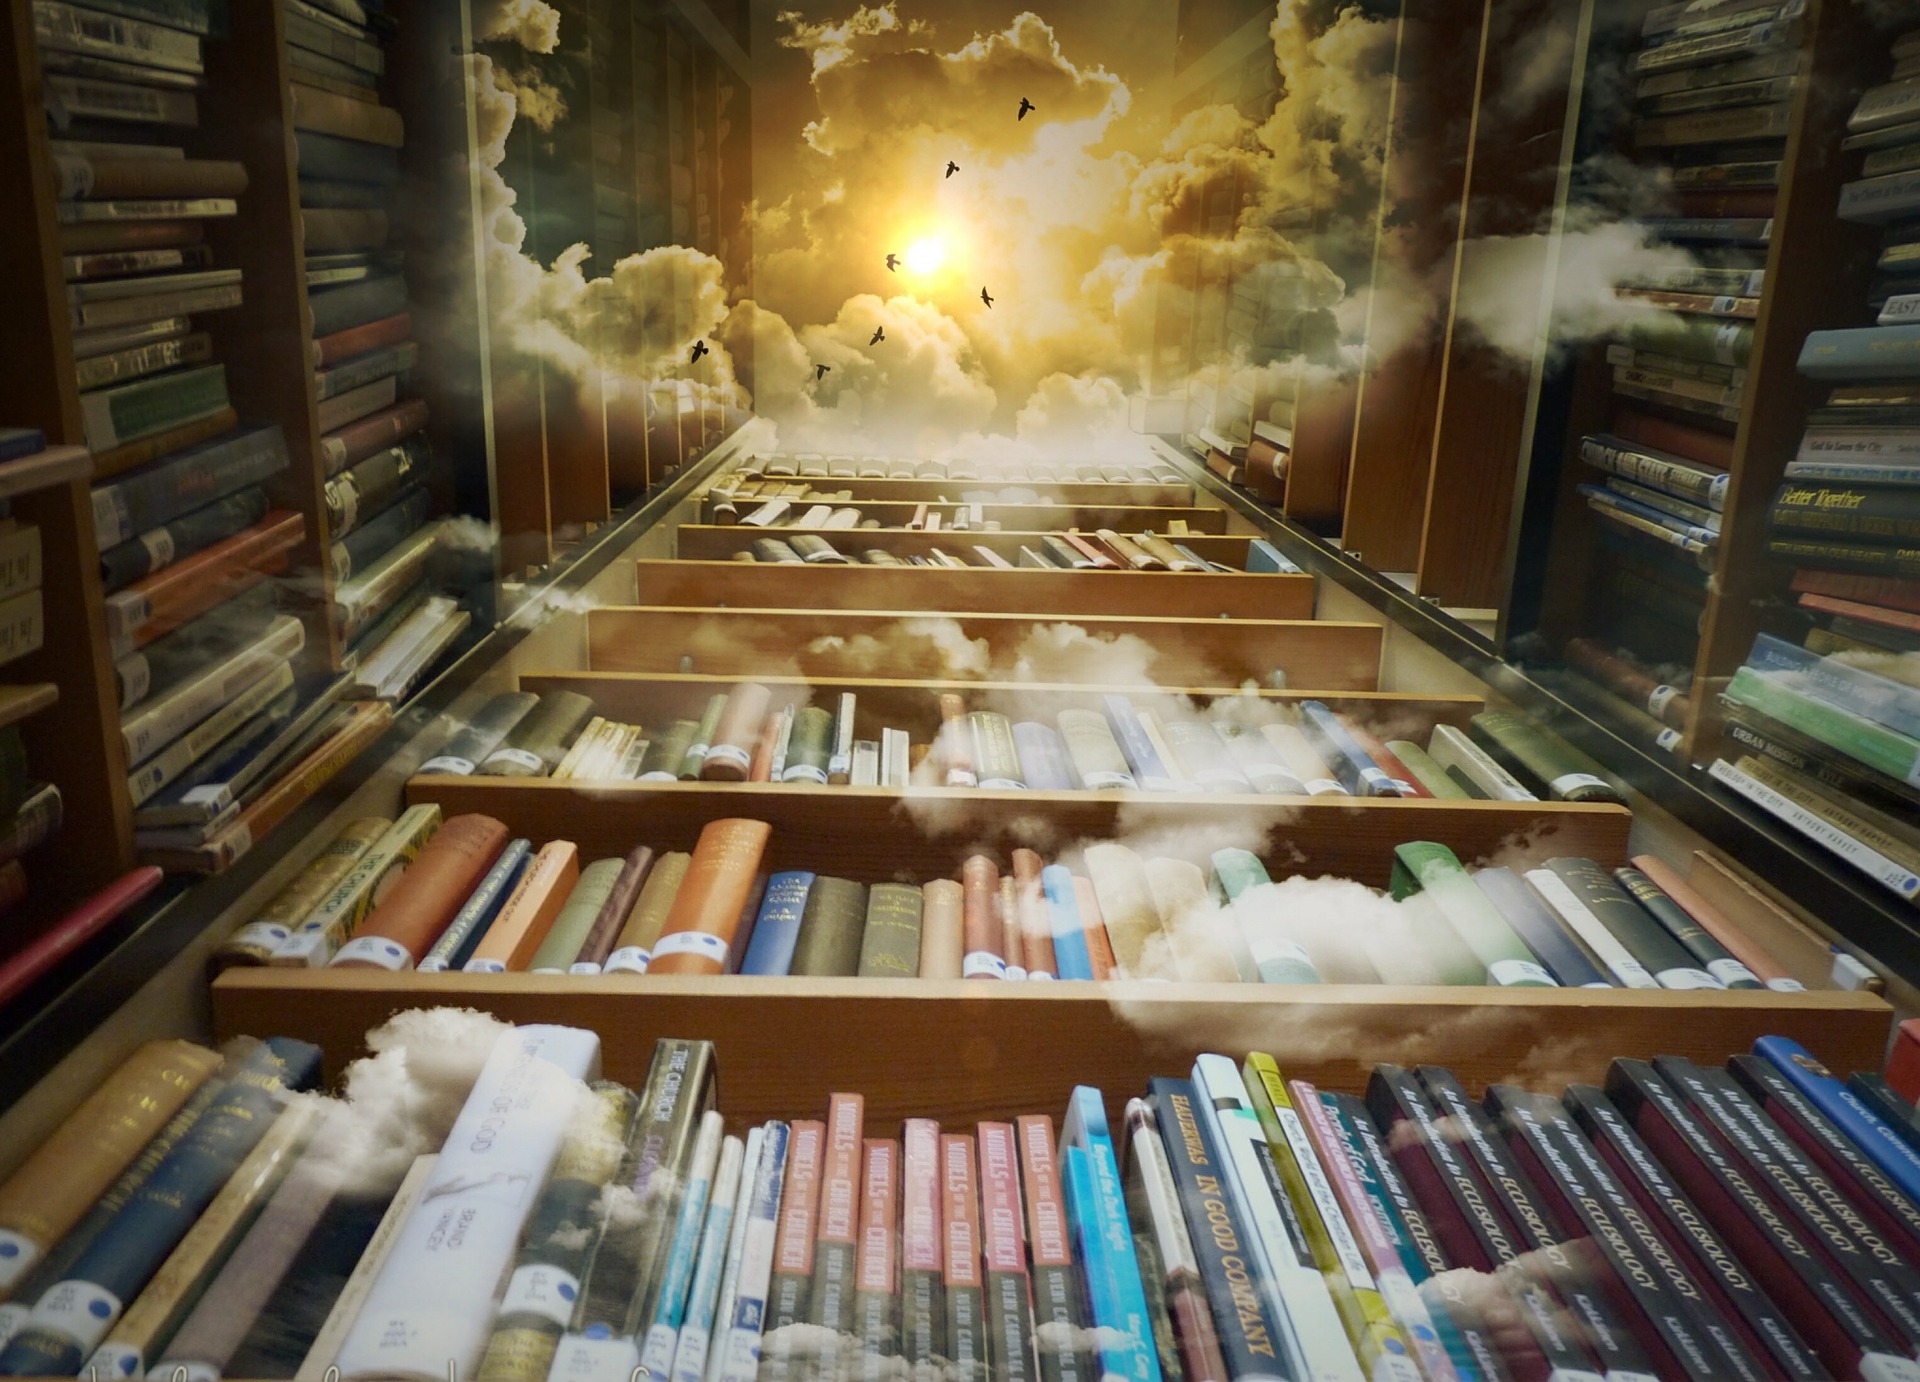 view looking up through bookshelves to open sky with clouds and birds